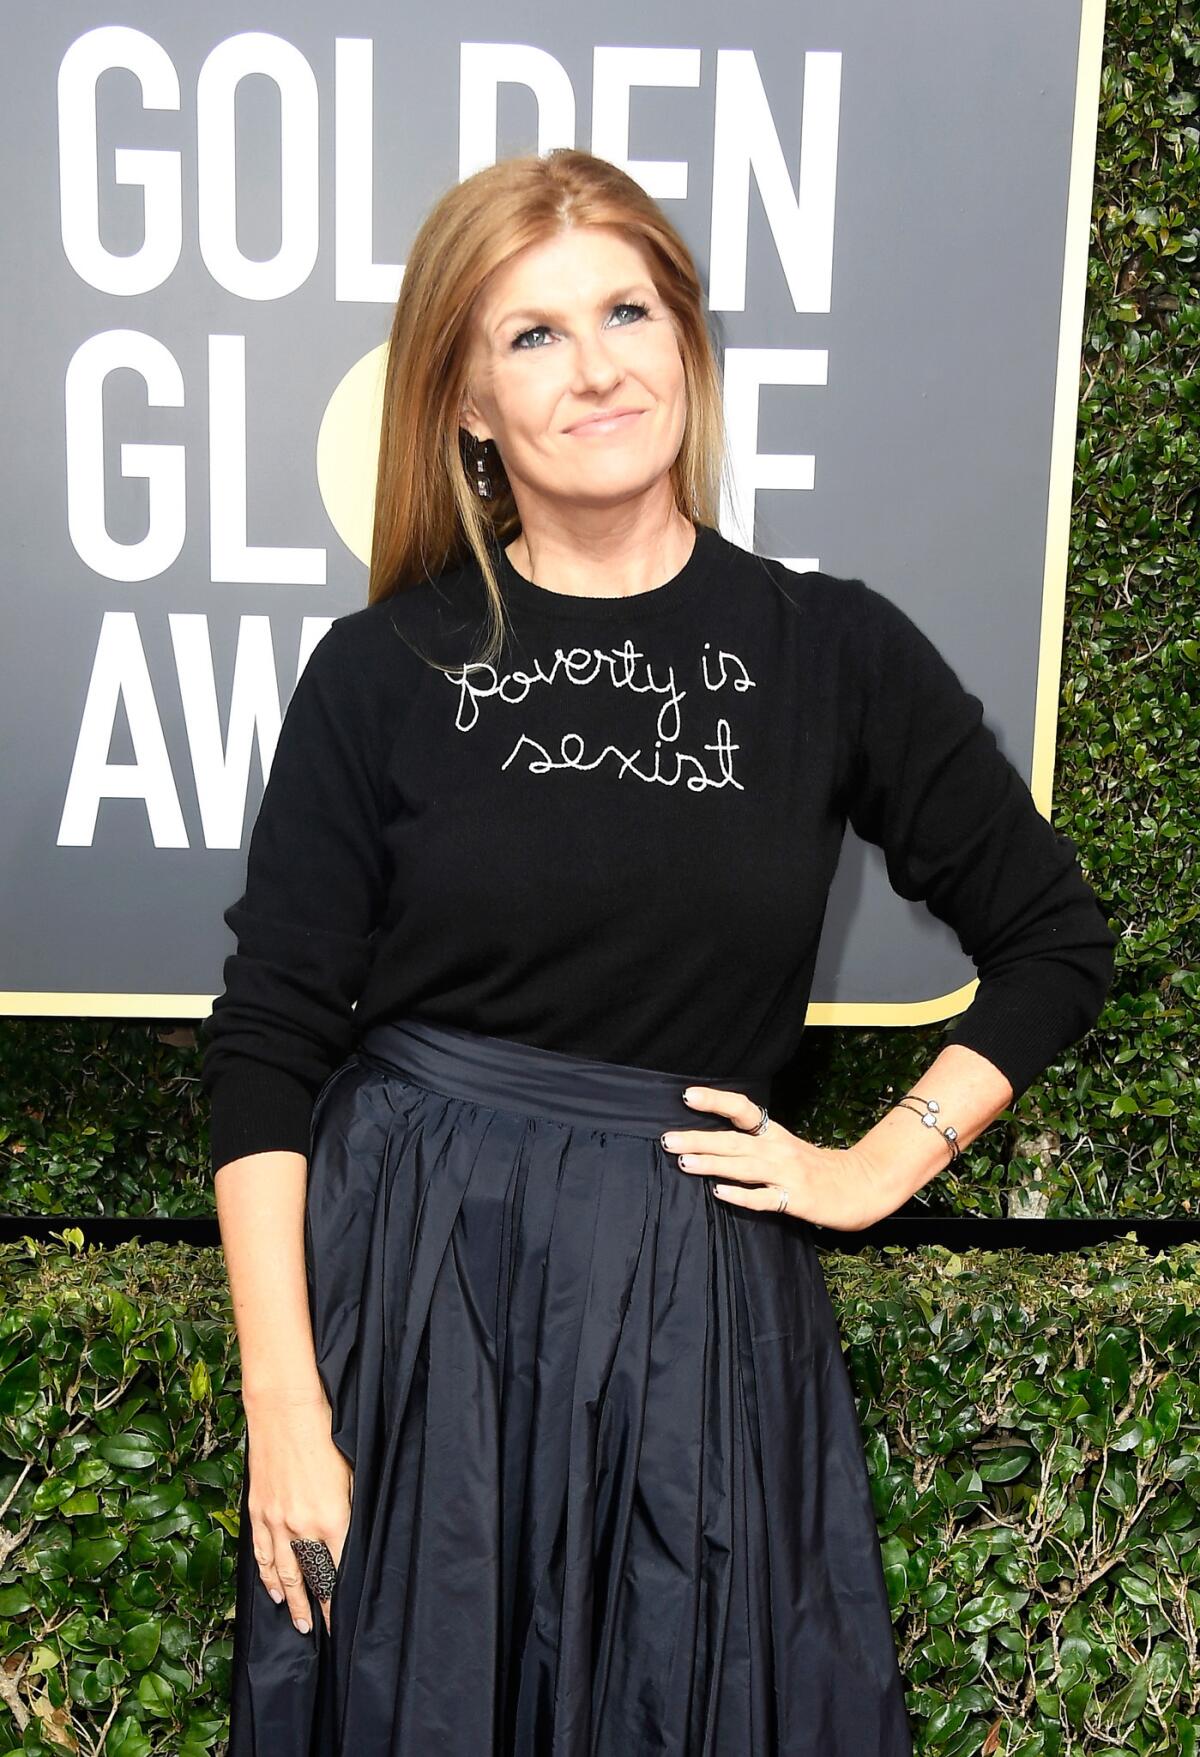 Actress Connie Britton at the 75th Golden Globe Awards at the Beverly Hilton Hotel on Jan. 7, 2018 in Beverly Hills.